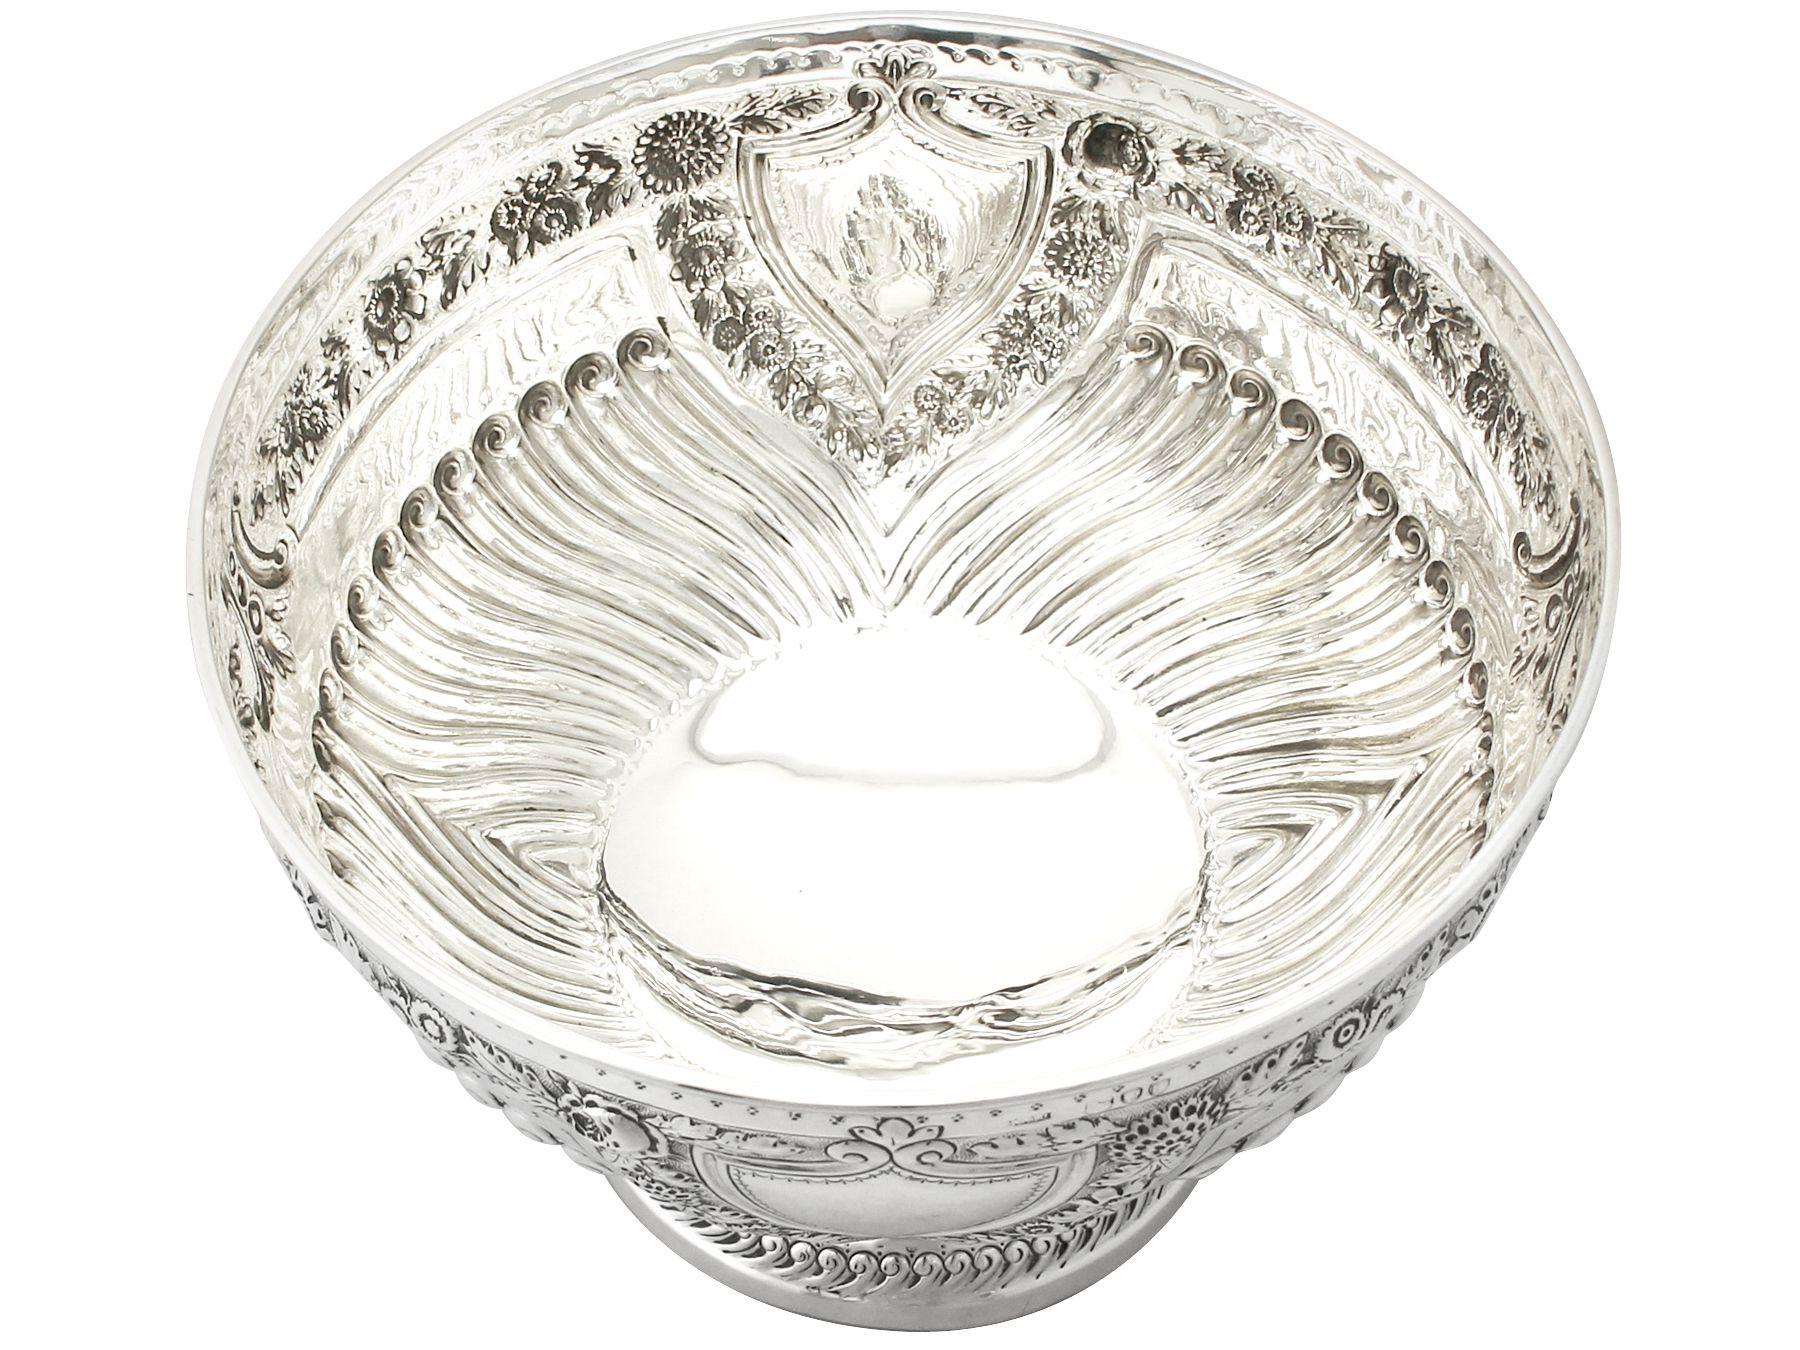 English Antique Victorian Sterling Silver Presentation Bowl by Josiah Williams & Co For Sale